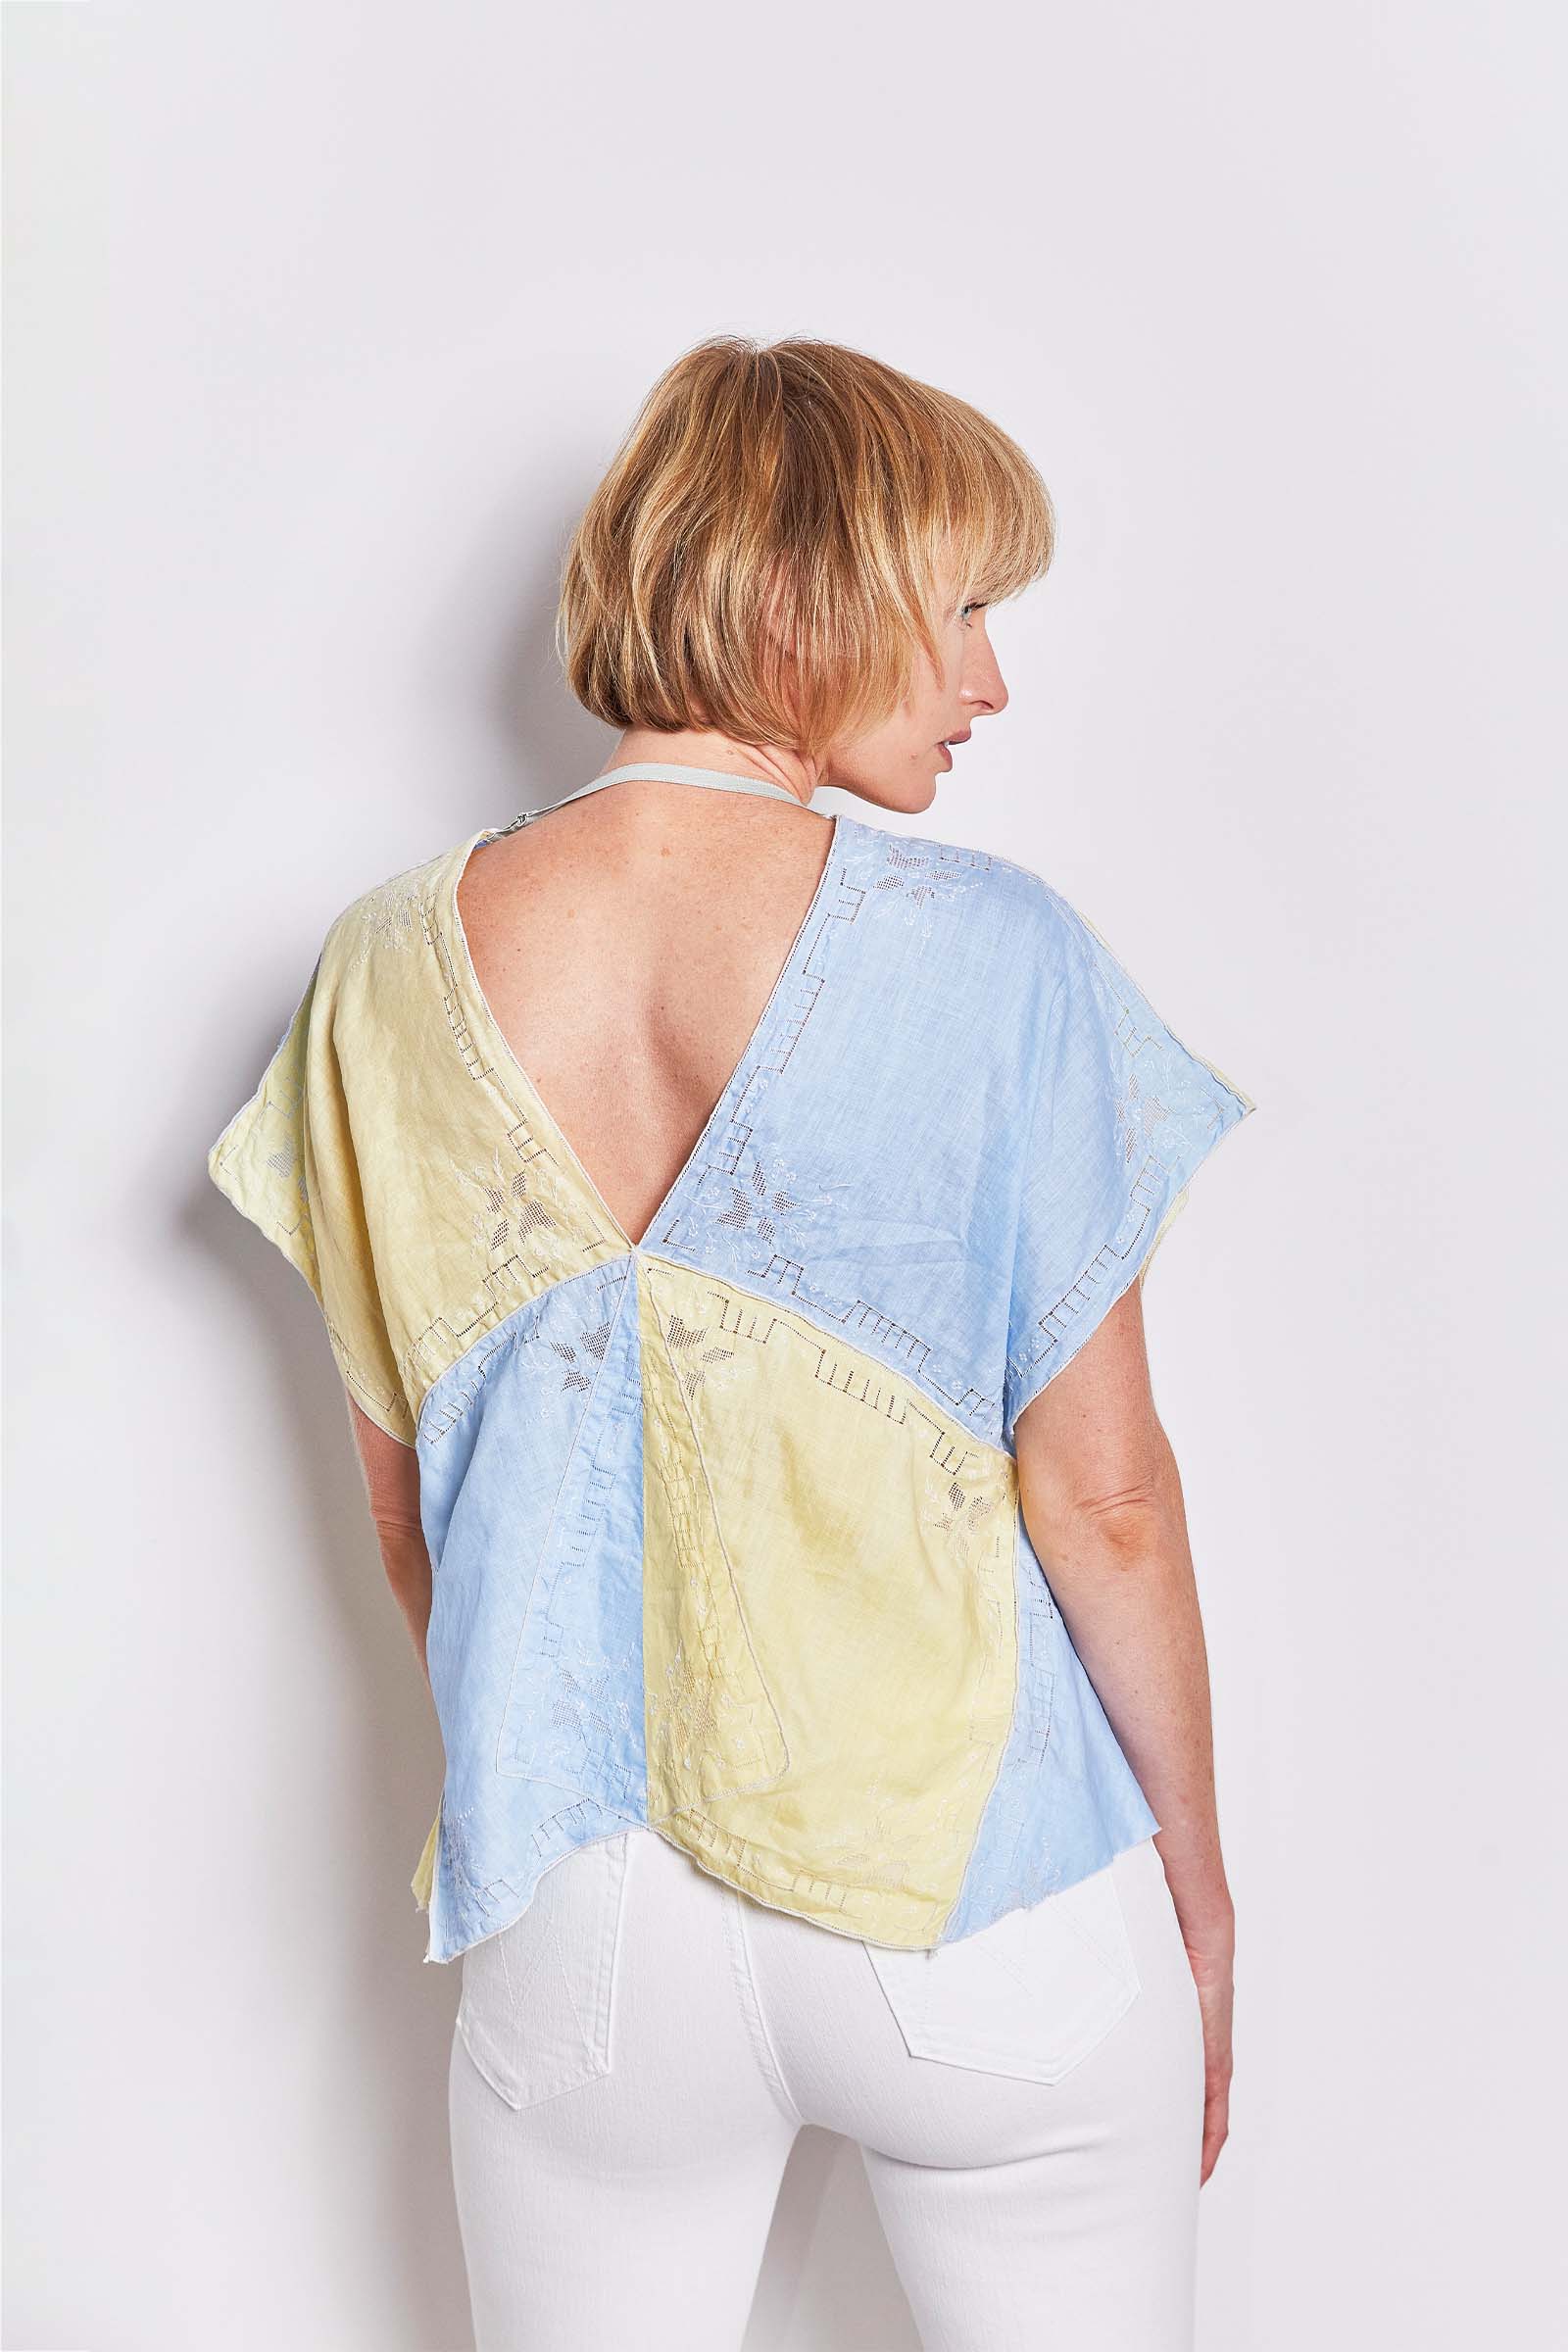 re-luxed re-imagined la lino sustainable linen top.